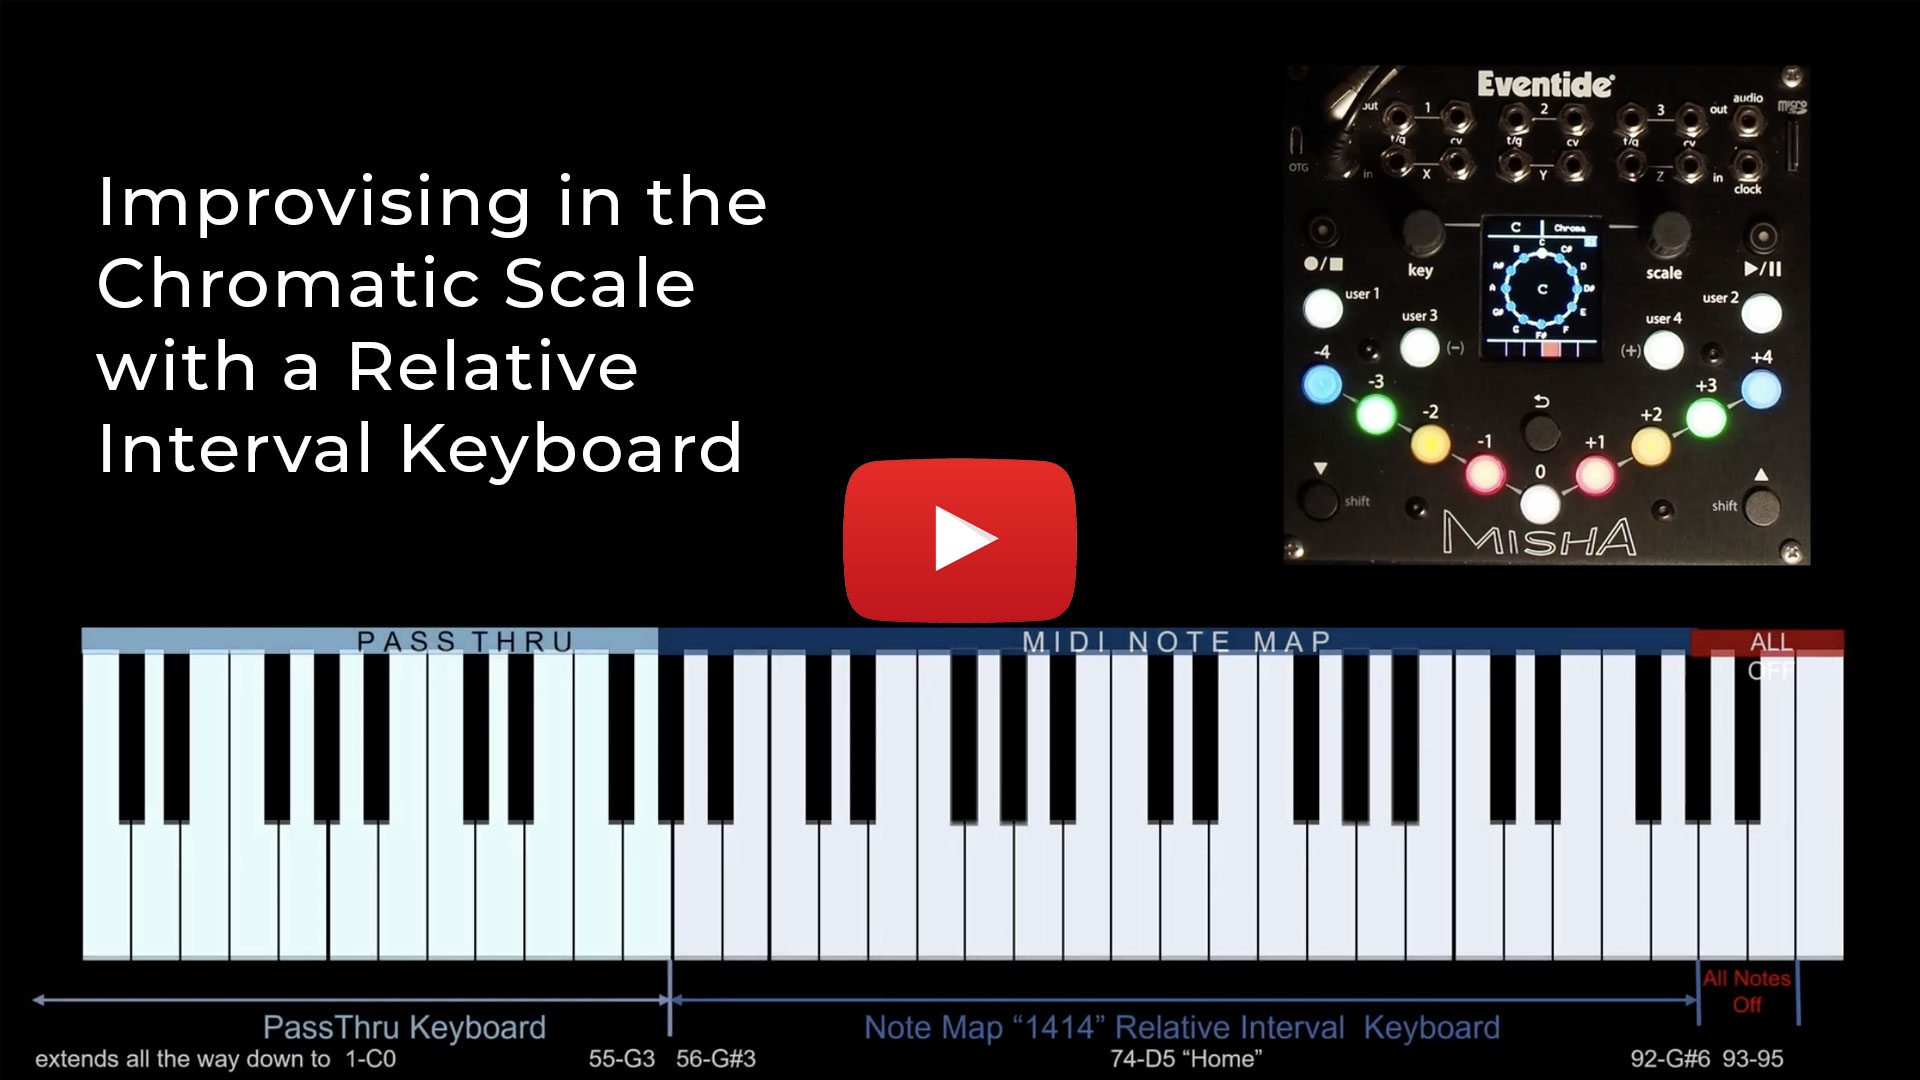 Improvising in the Chromatic Scale with a Relative Interval Keyboard